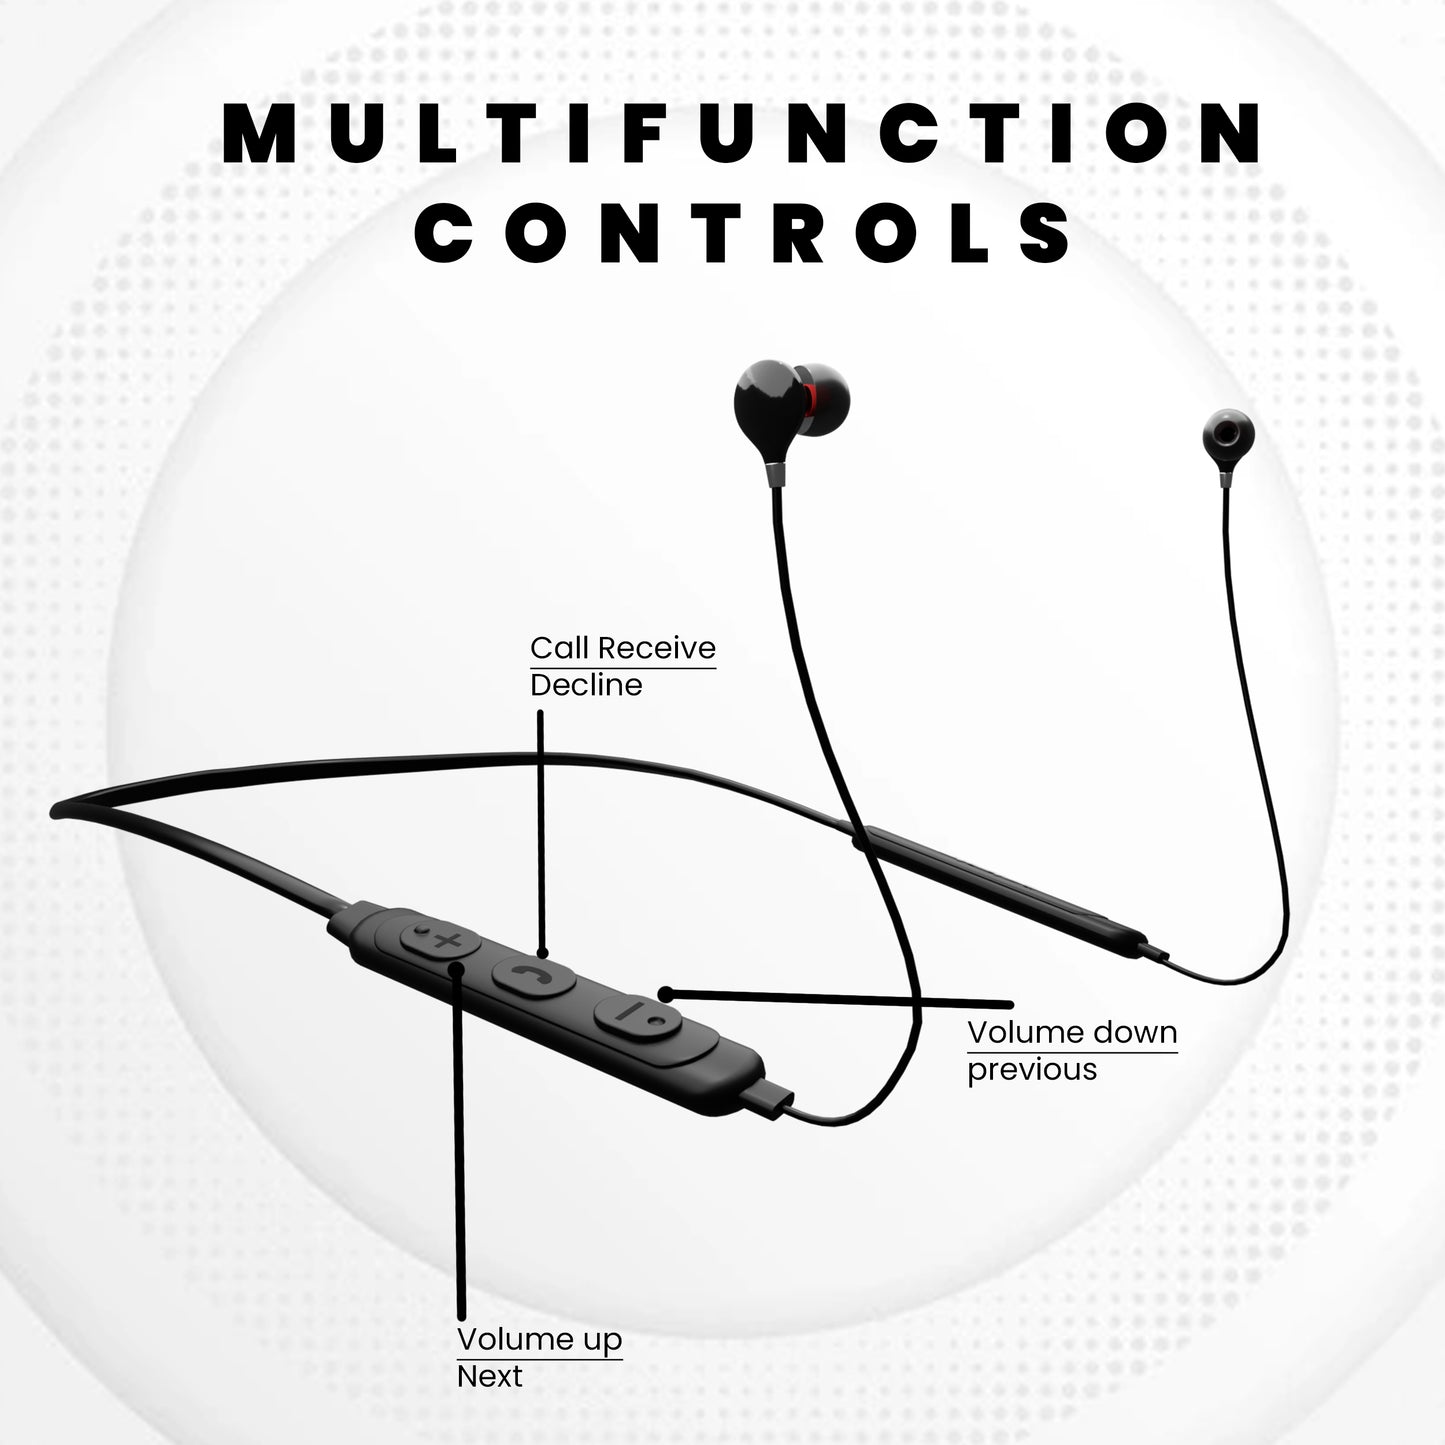 IAIR Curve X Bluetooth Headset Audio, Long Battery Life, Low Latency Gaming, Comfortable Fit - Made in India